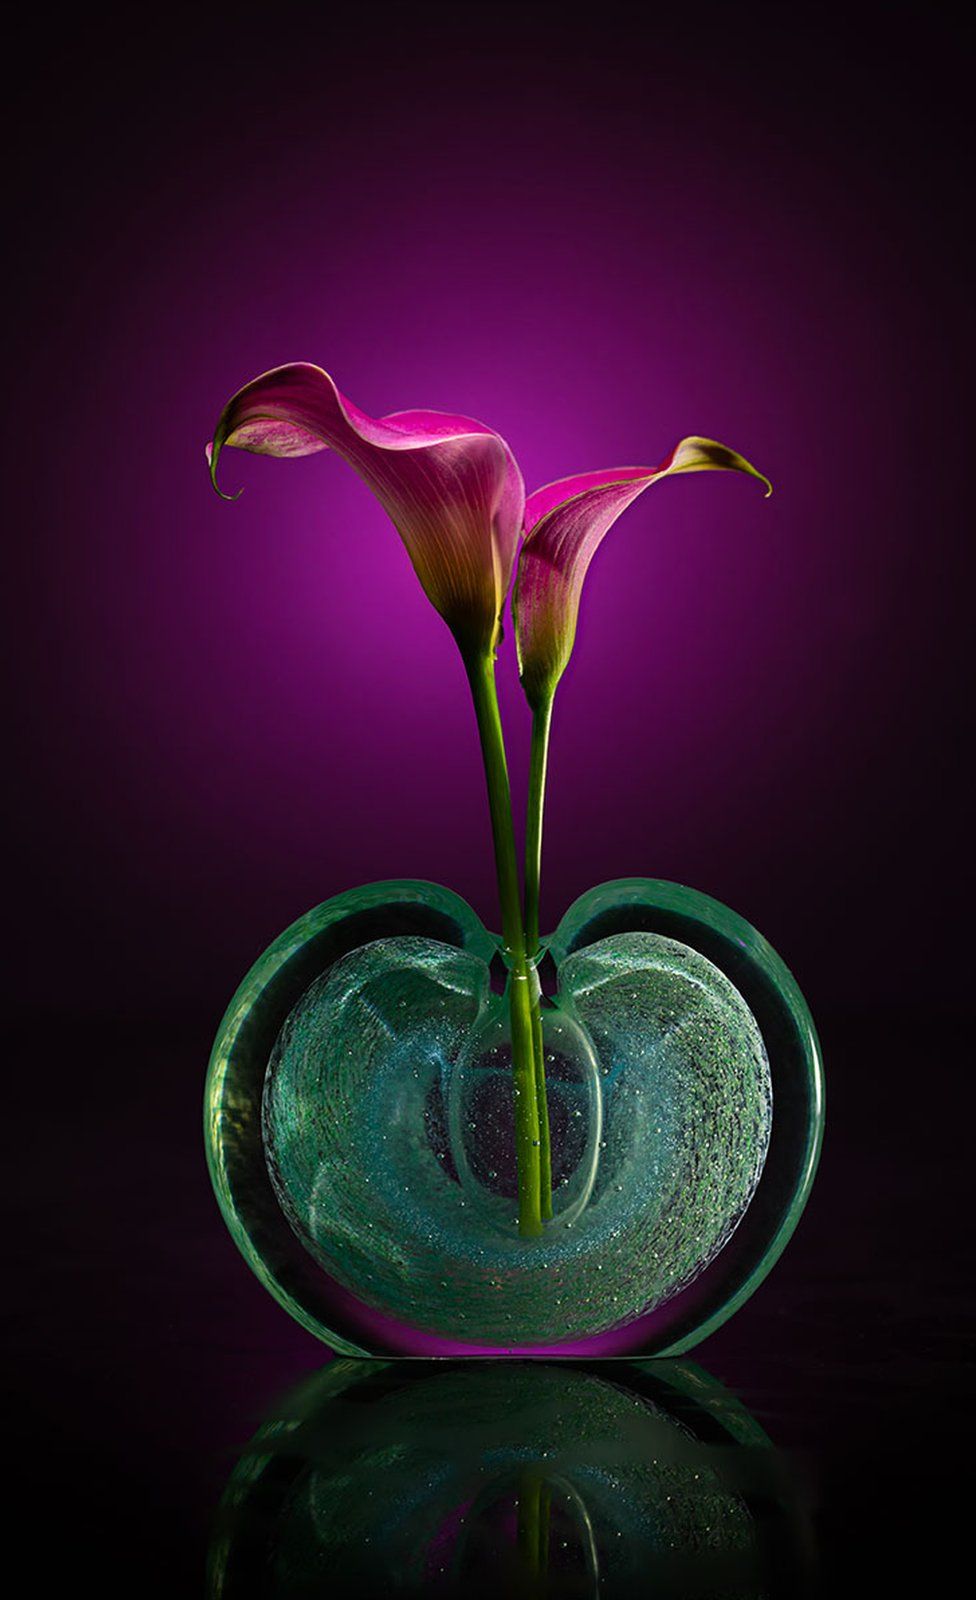 Two flowers in a perfume bottle with a dark purple background